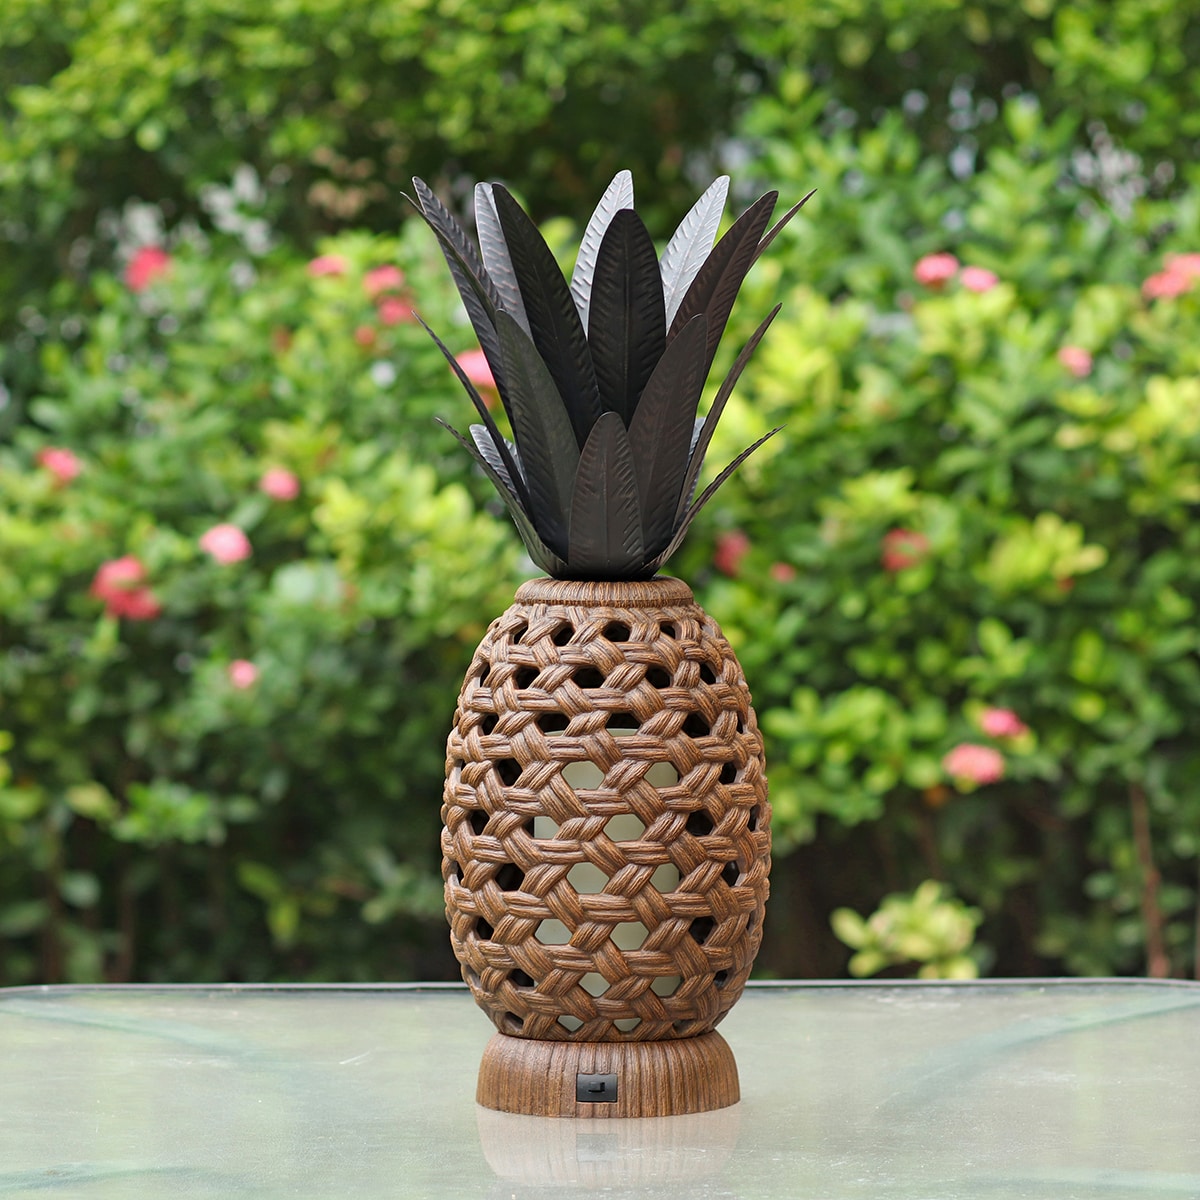 Blonde Pineapple - You don't have to have a green thumb to put the perfect  touches of greenery in your space! Placing greenery balls on a set of  candlesticks adds texture and